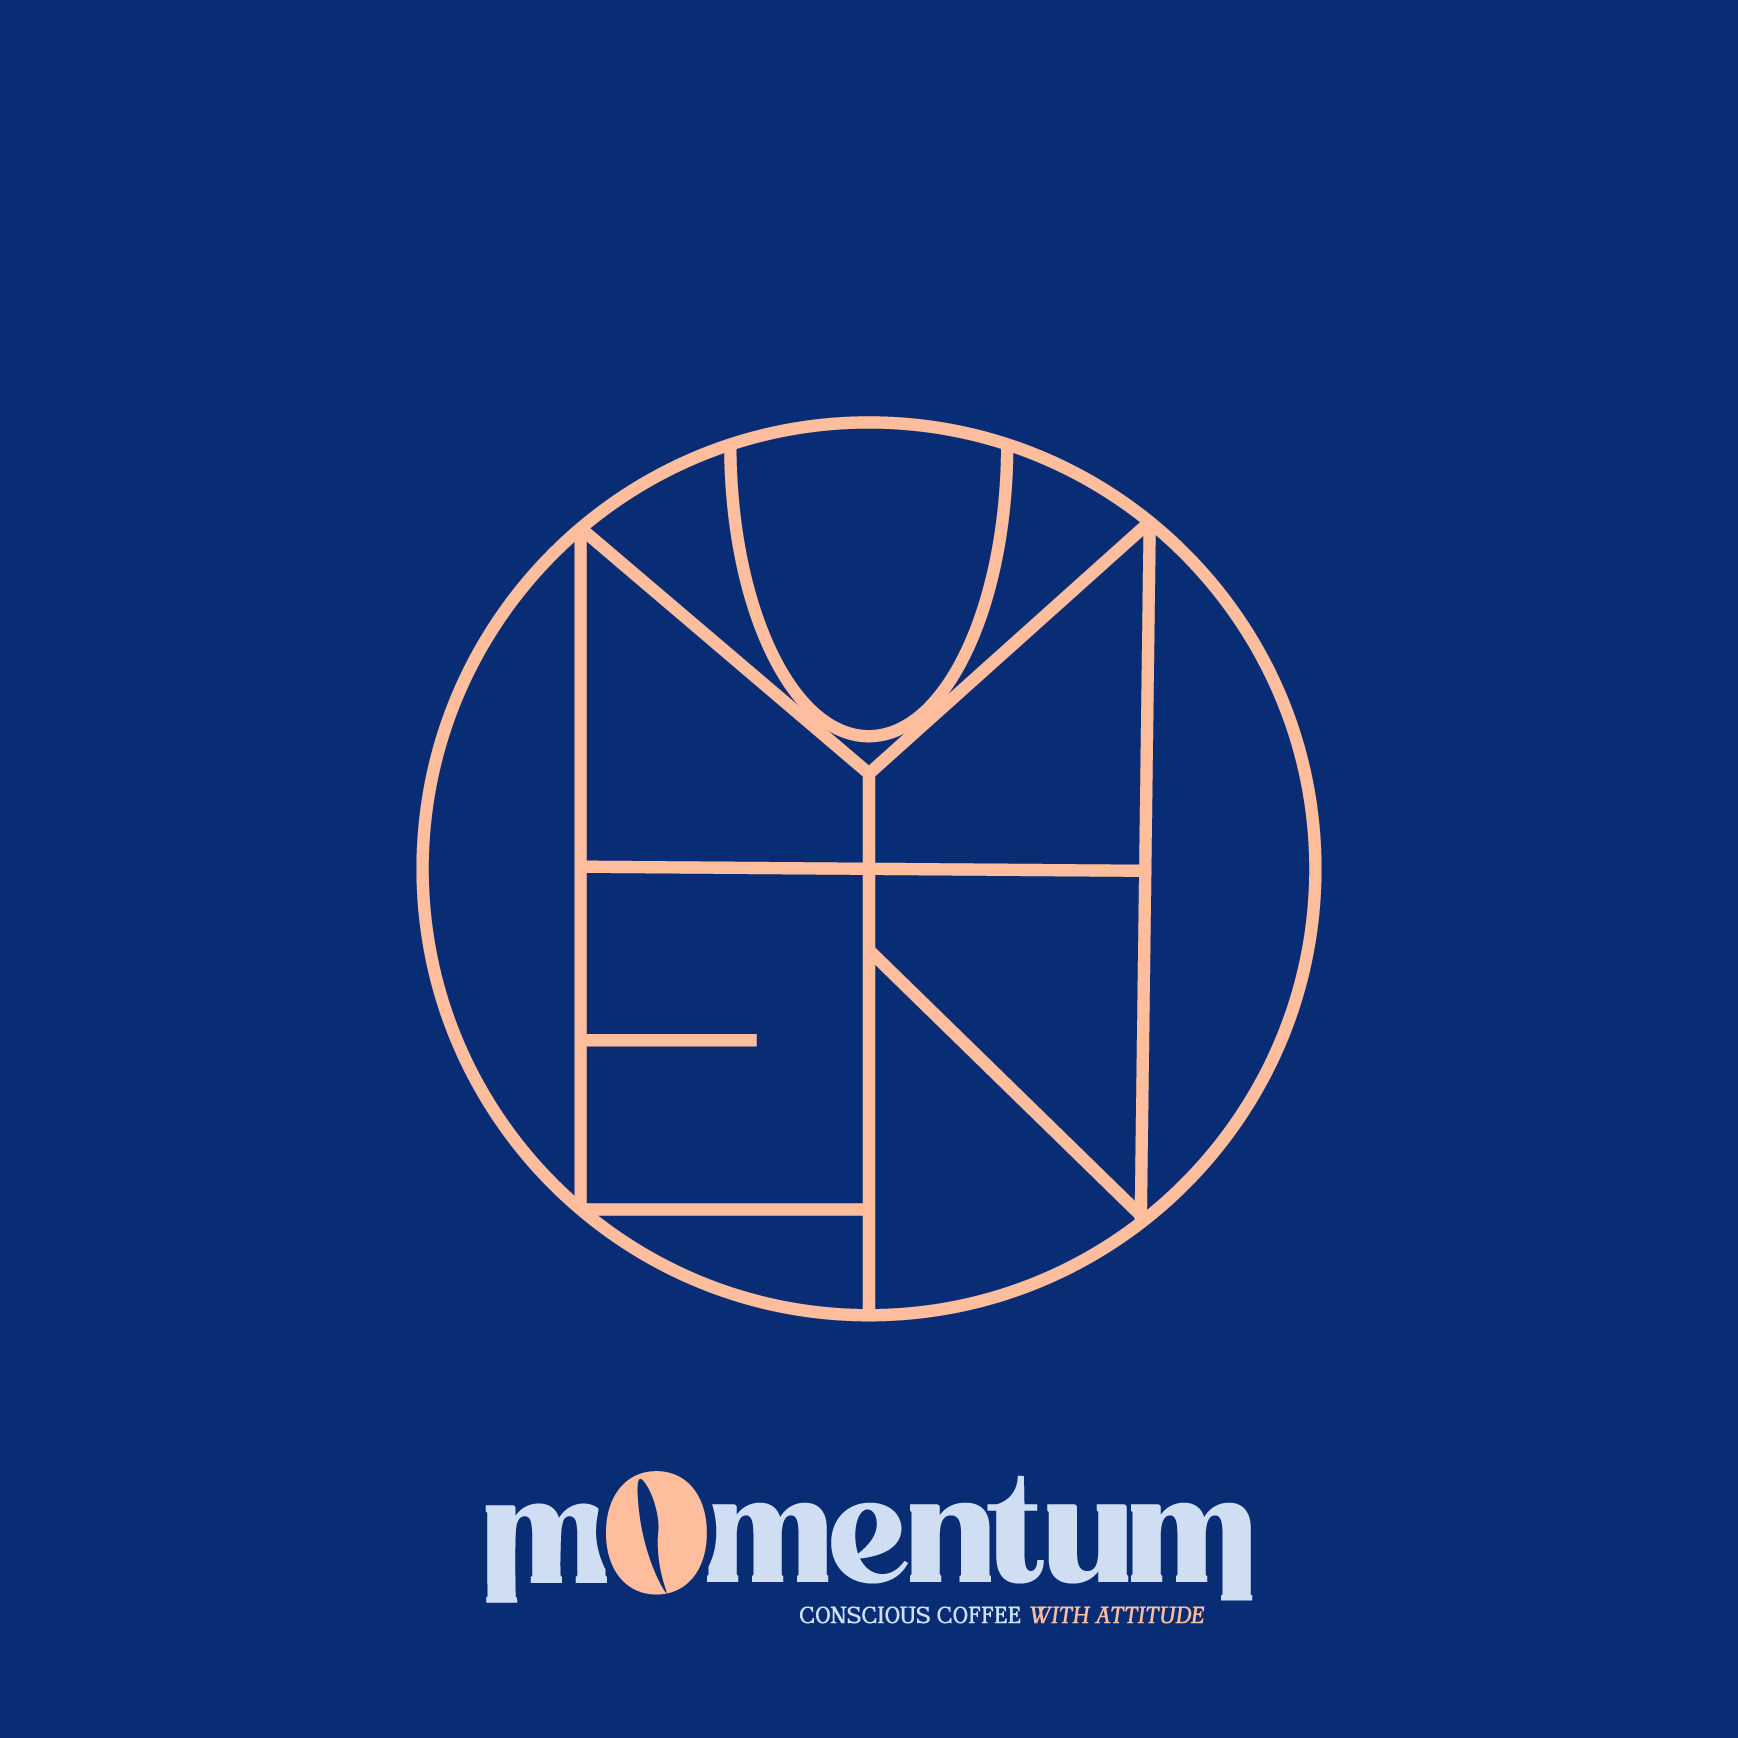 Club Image for MOMENTUM